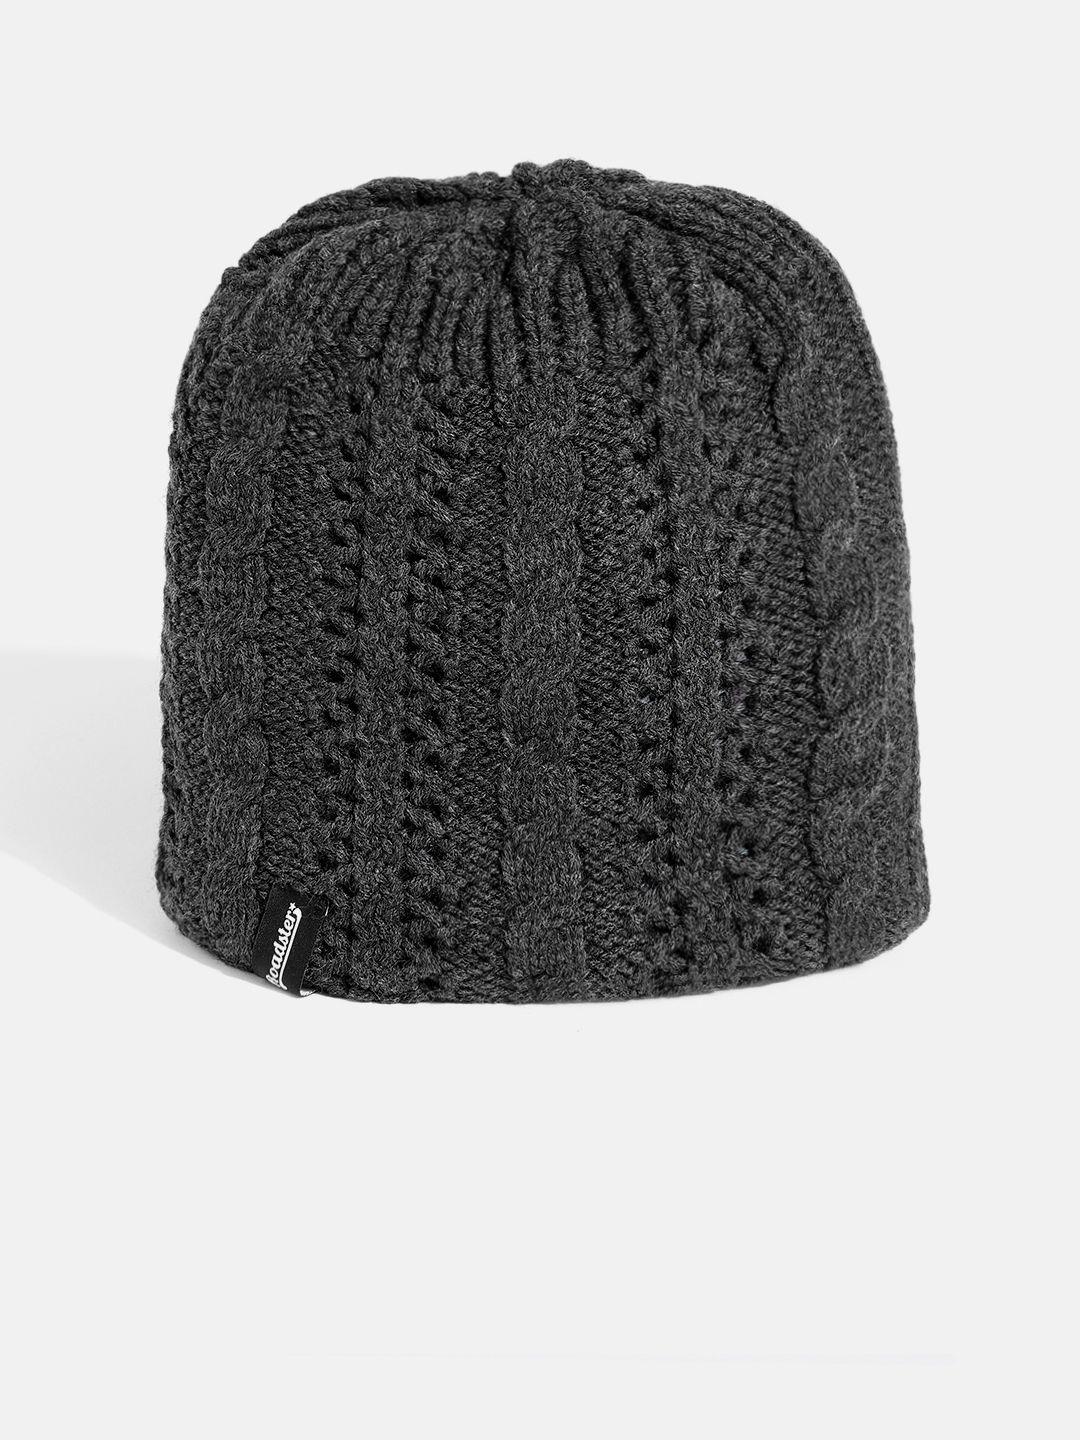 the roadster lifestyle co unisex charcoal grey cable knit beanie